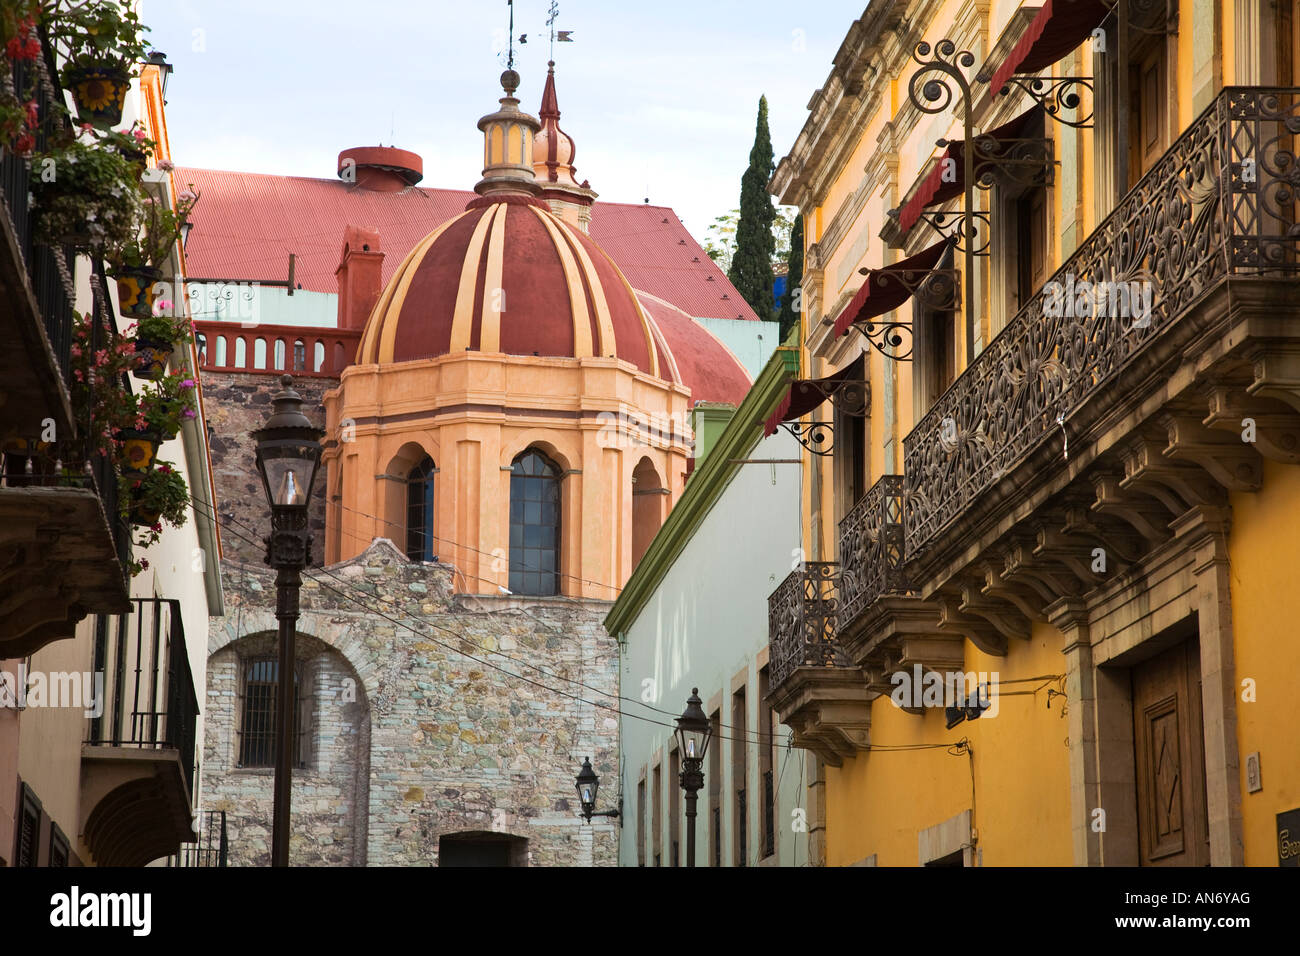 MEXICO Guanajuato Dome of Templo de San Diego and iron railings on buildings along Alonso Street Stock Photo